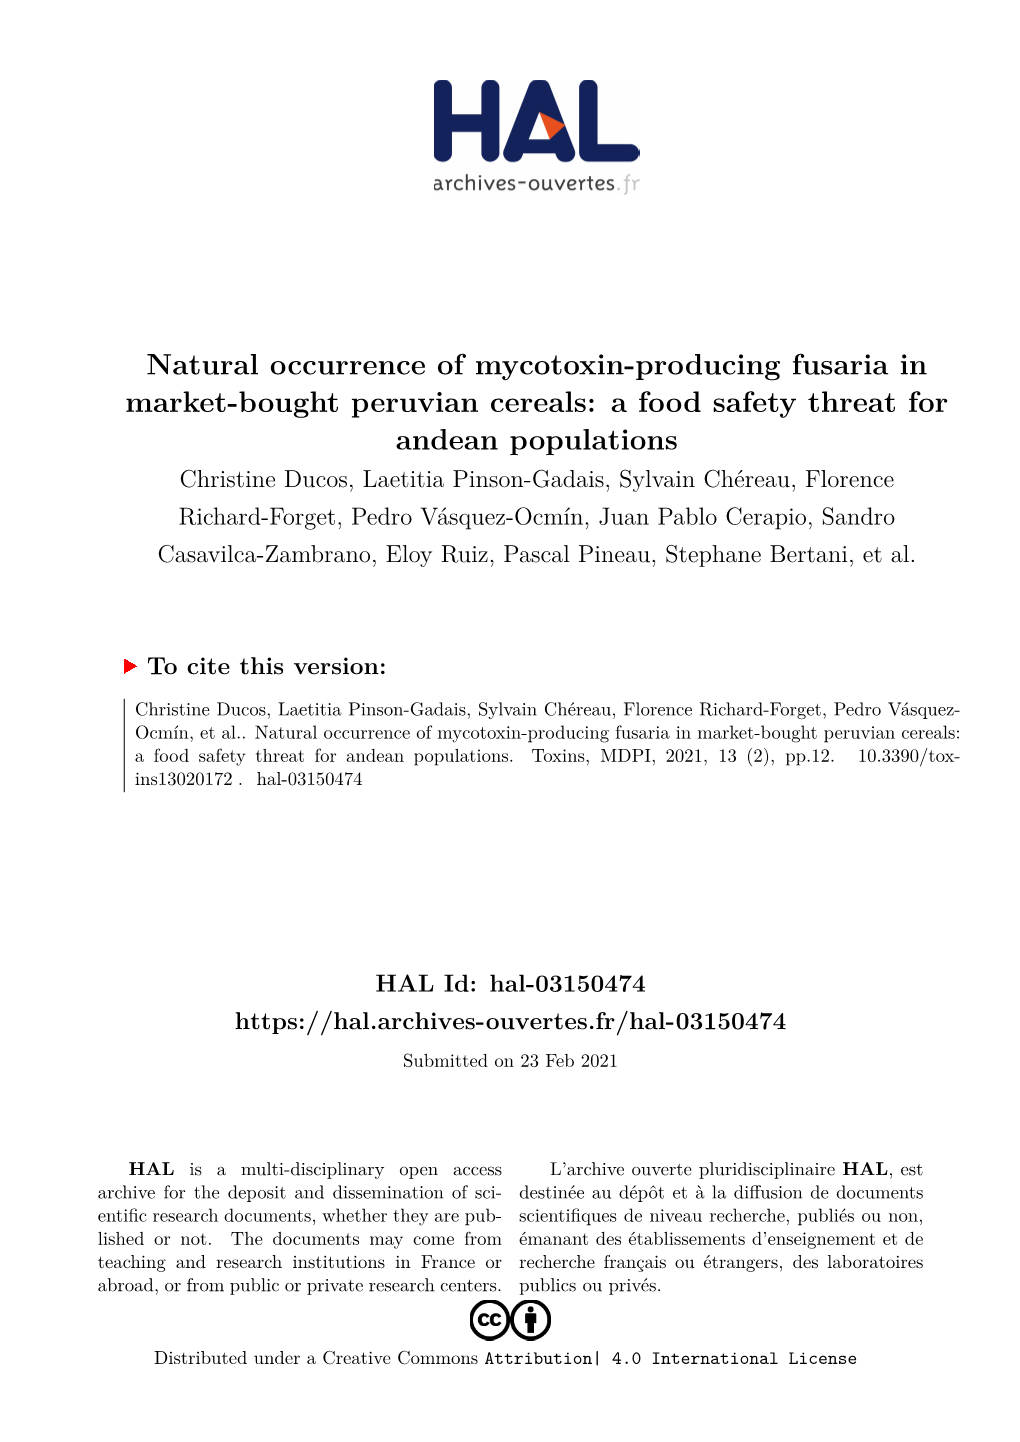 A Food Safety Threat for Andean Populations